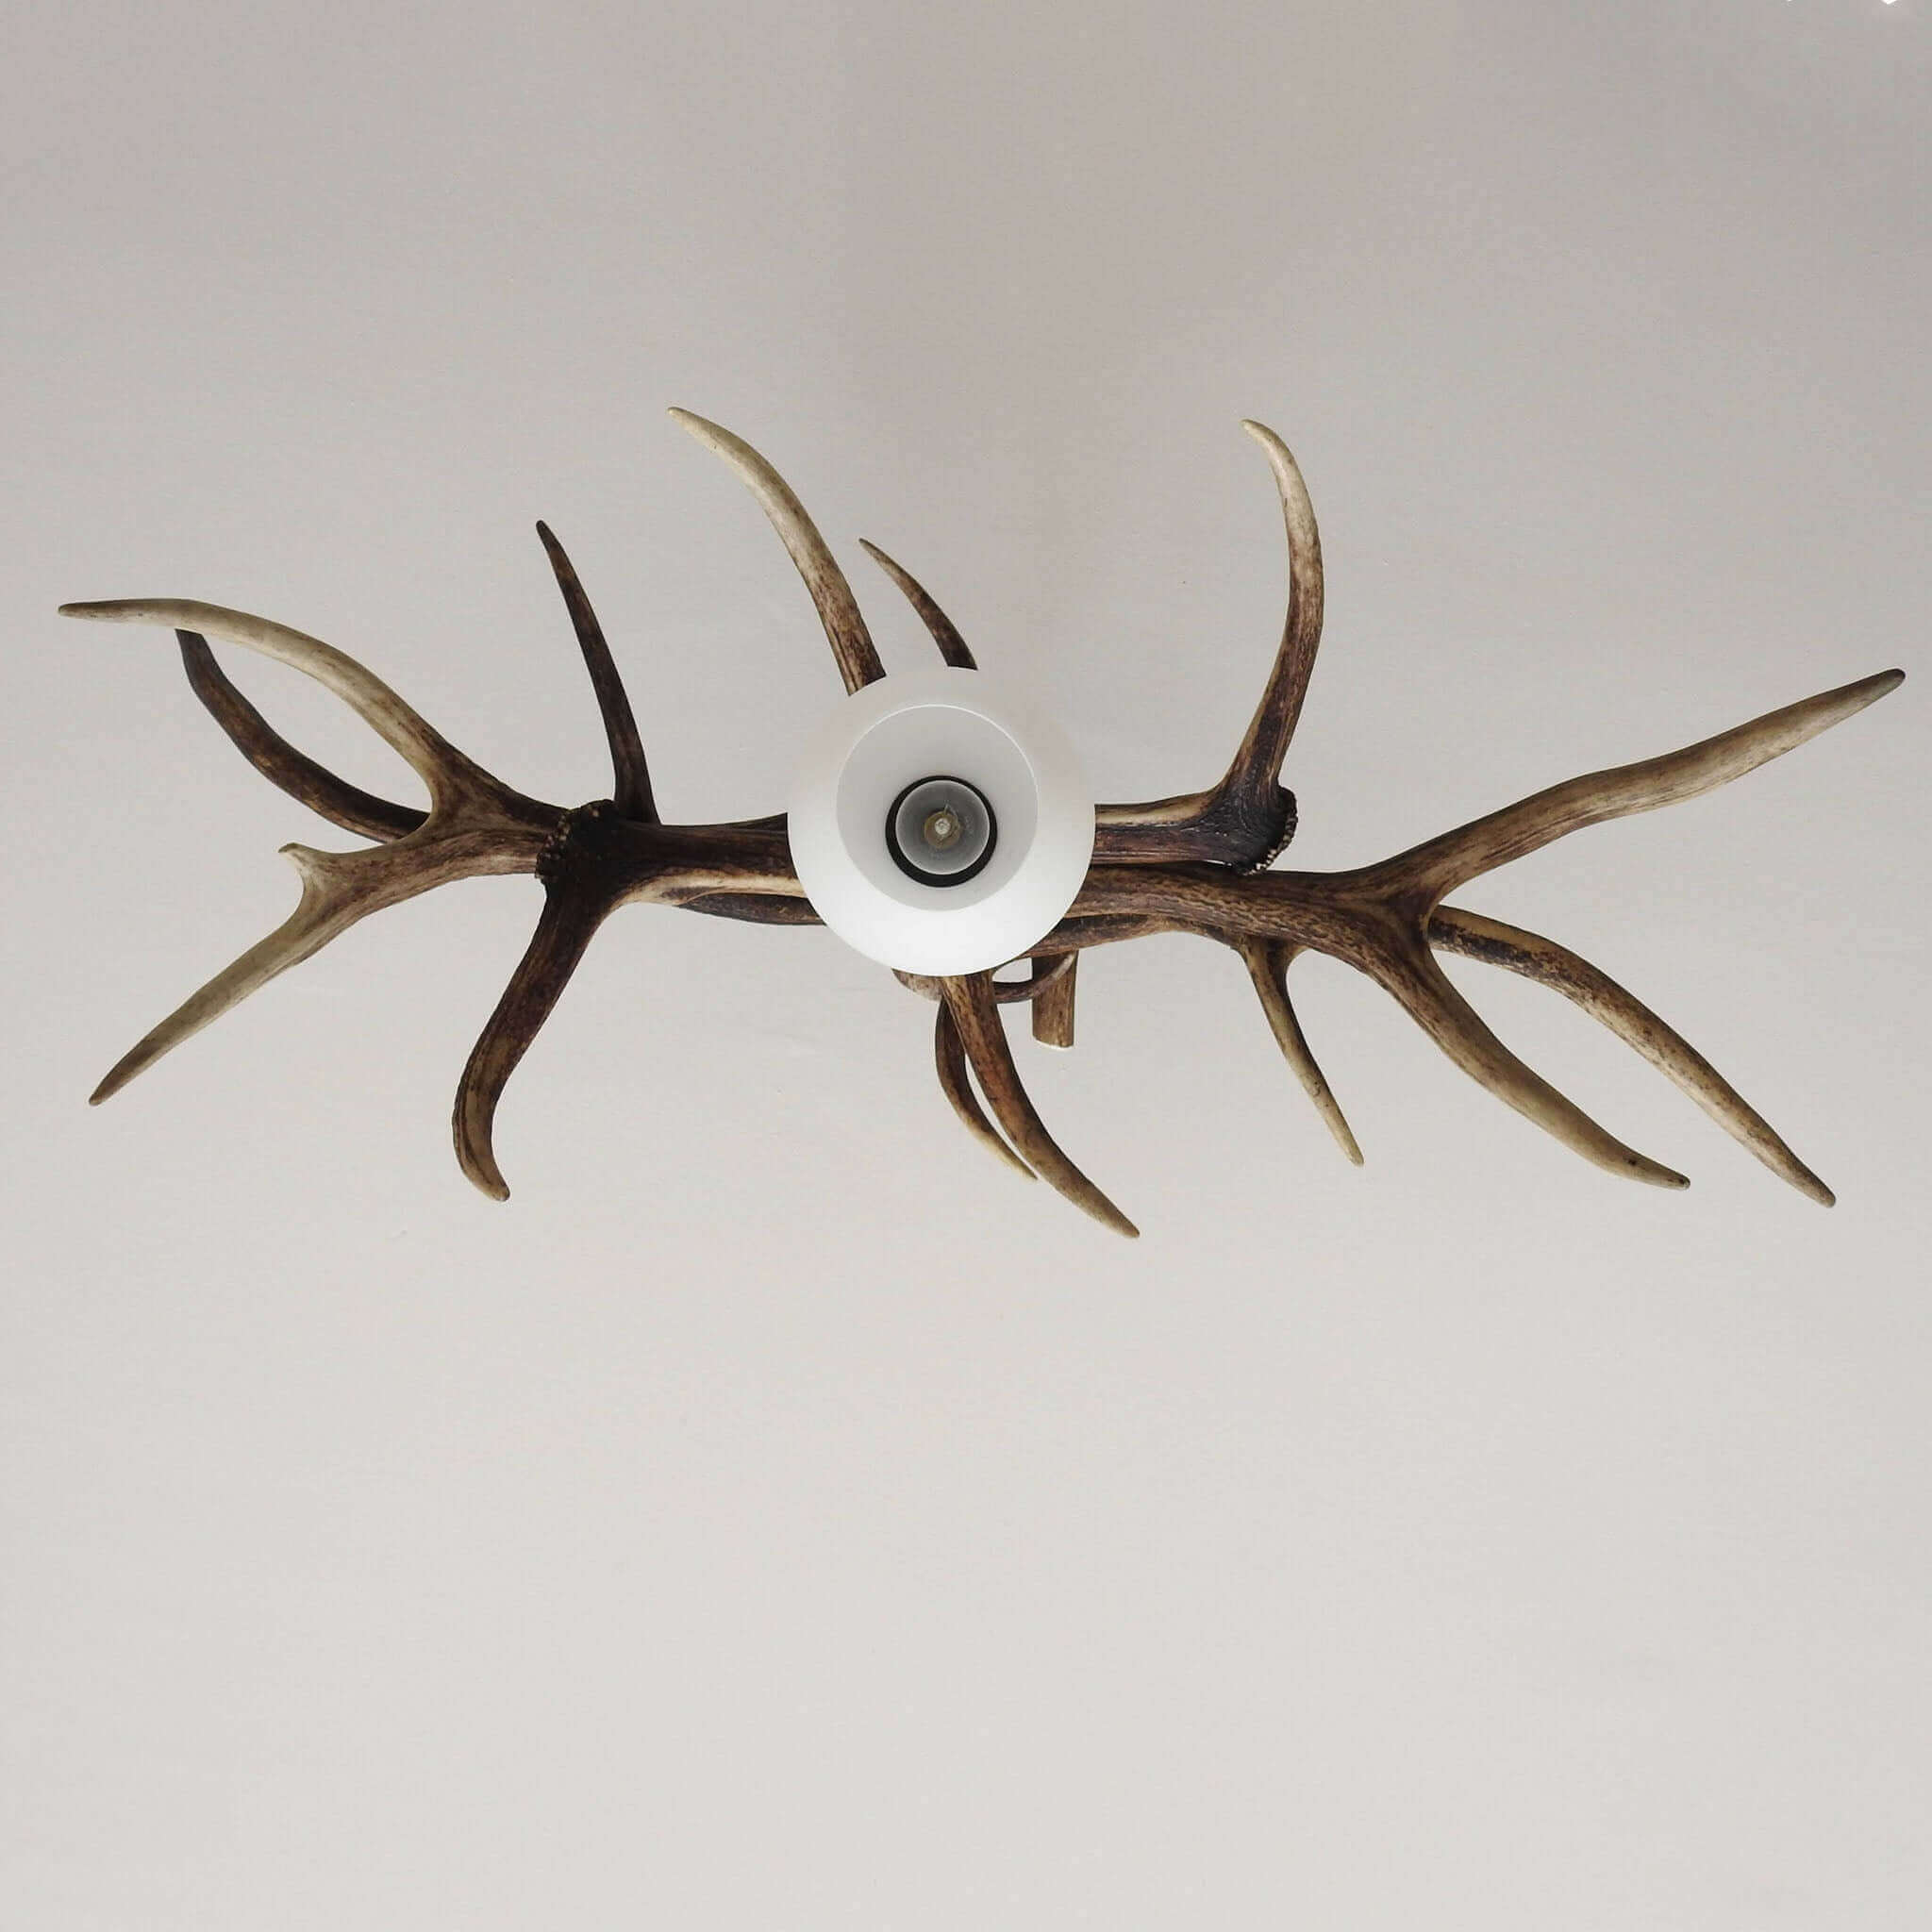 Antler pendant lamp made of red deer antlers, view from the bottom.